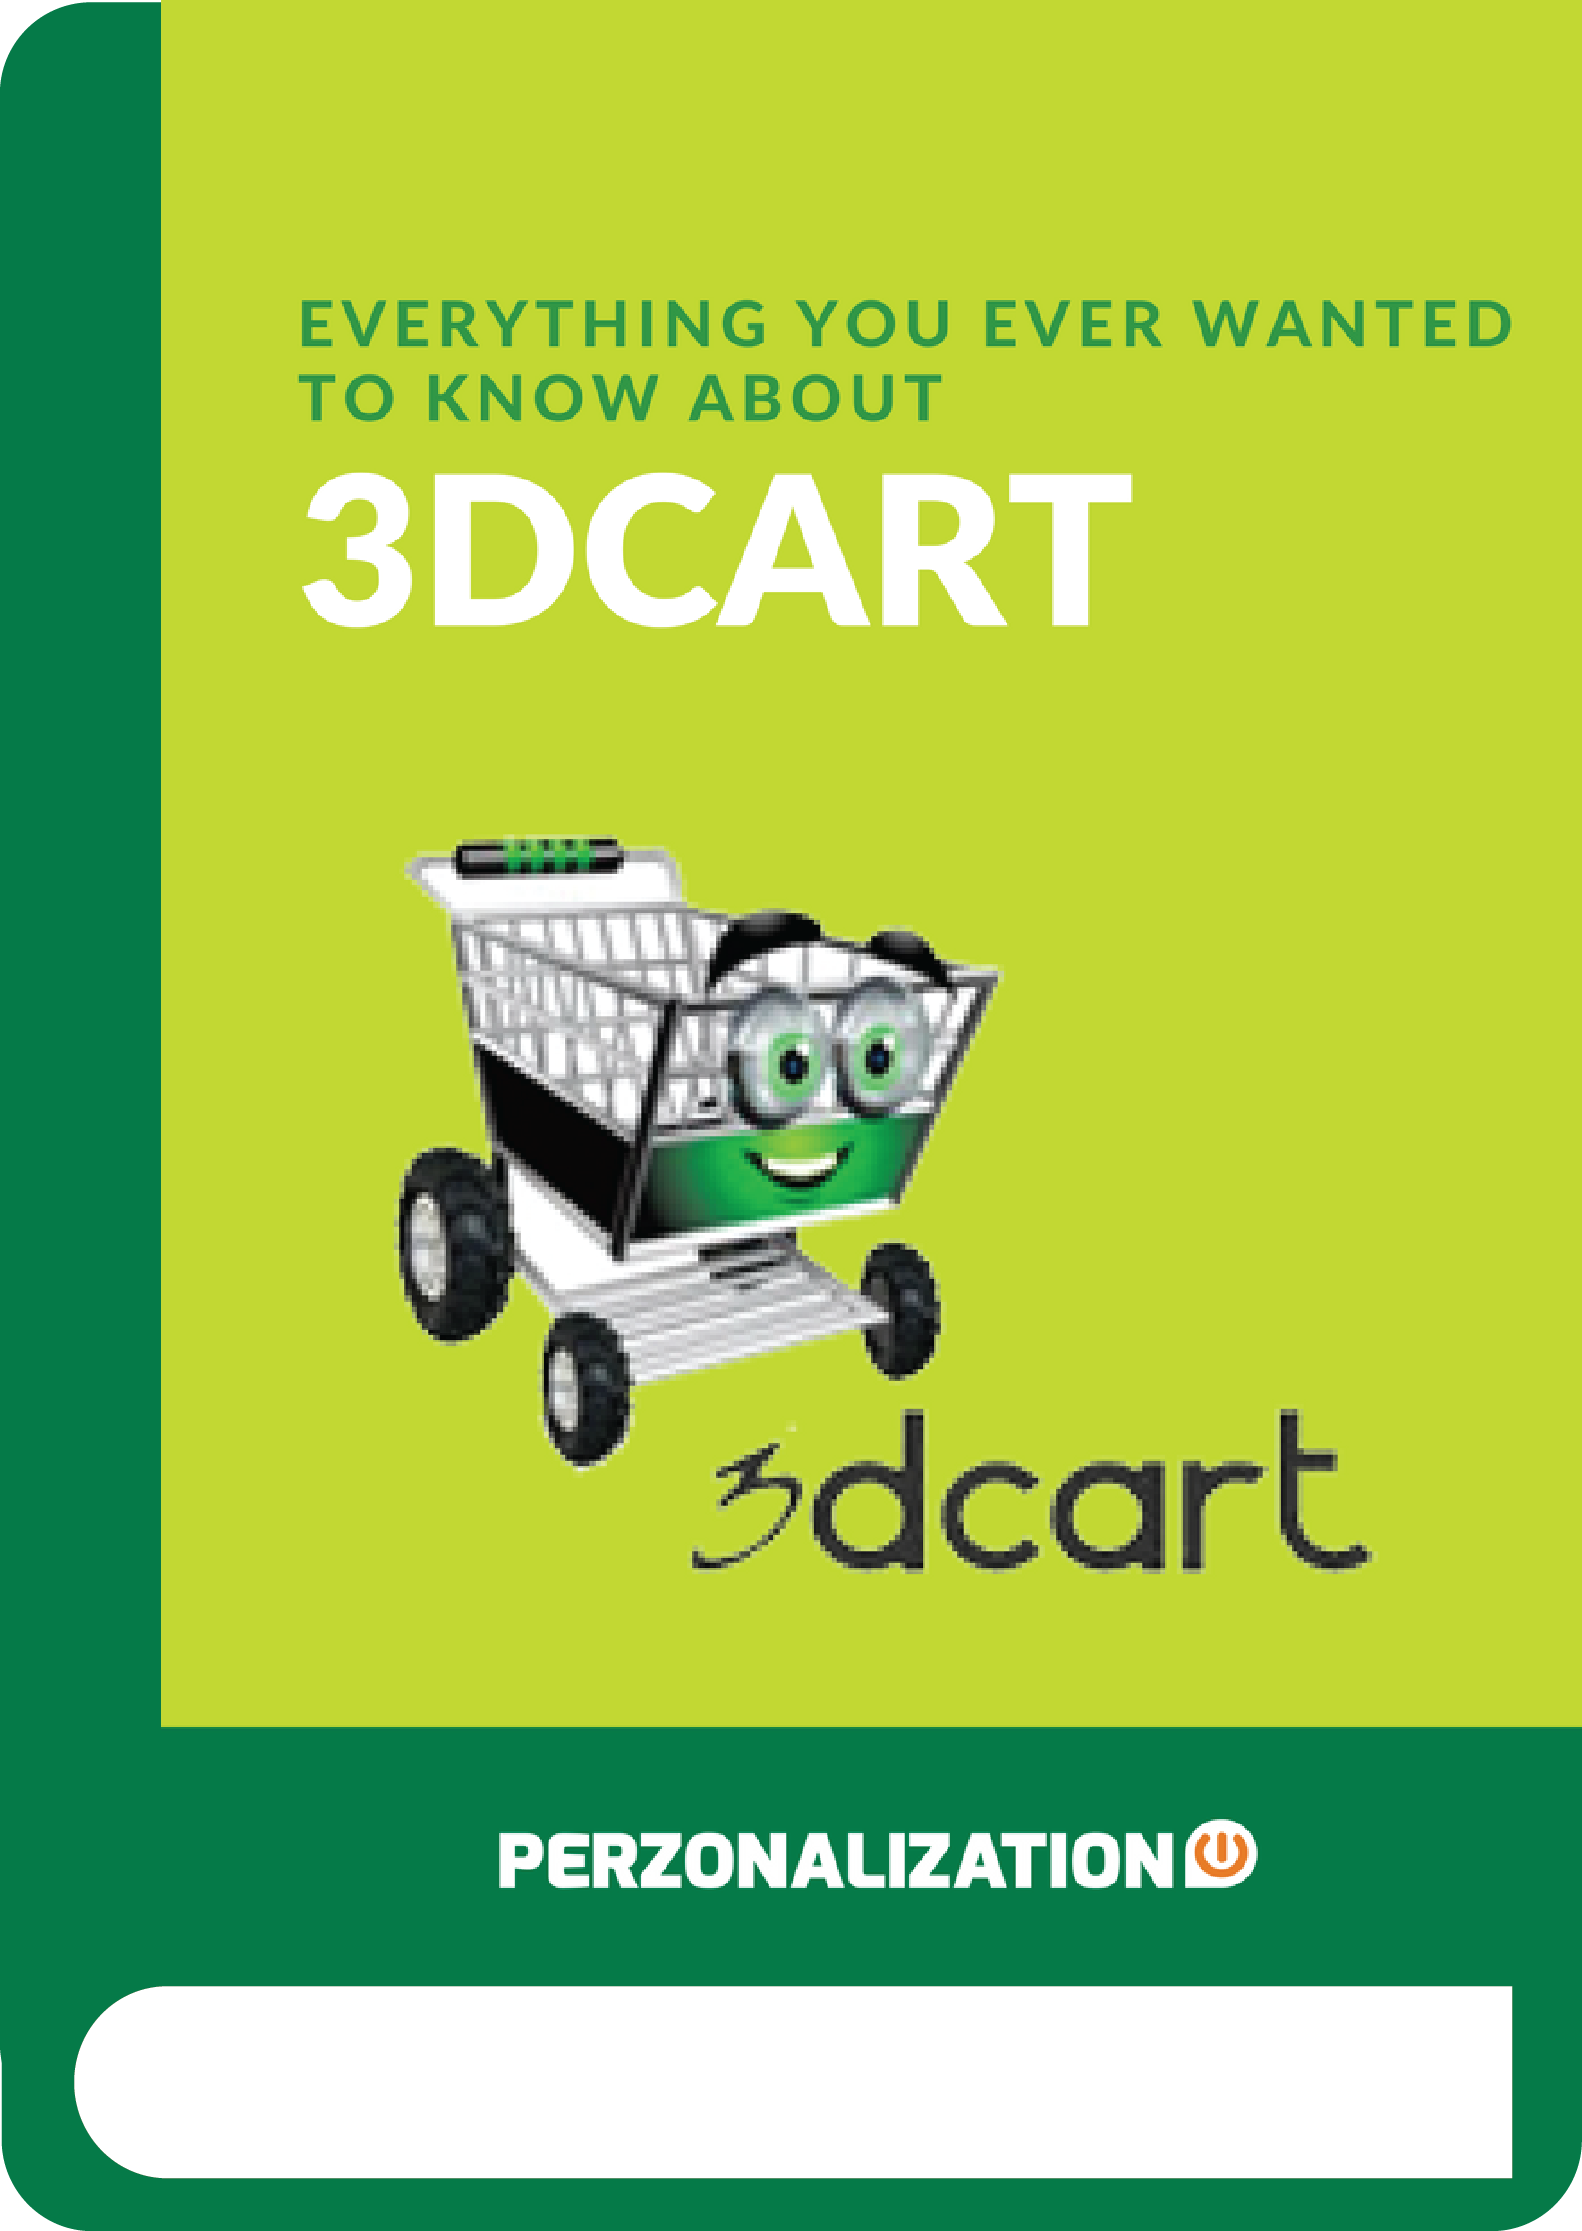 3dcart is a versatile and award-winning shopping cart software designed to cater to online businesses – both big and small.